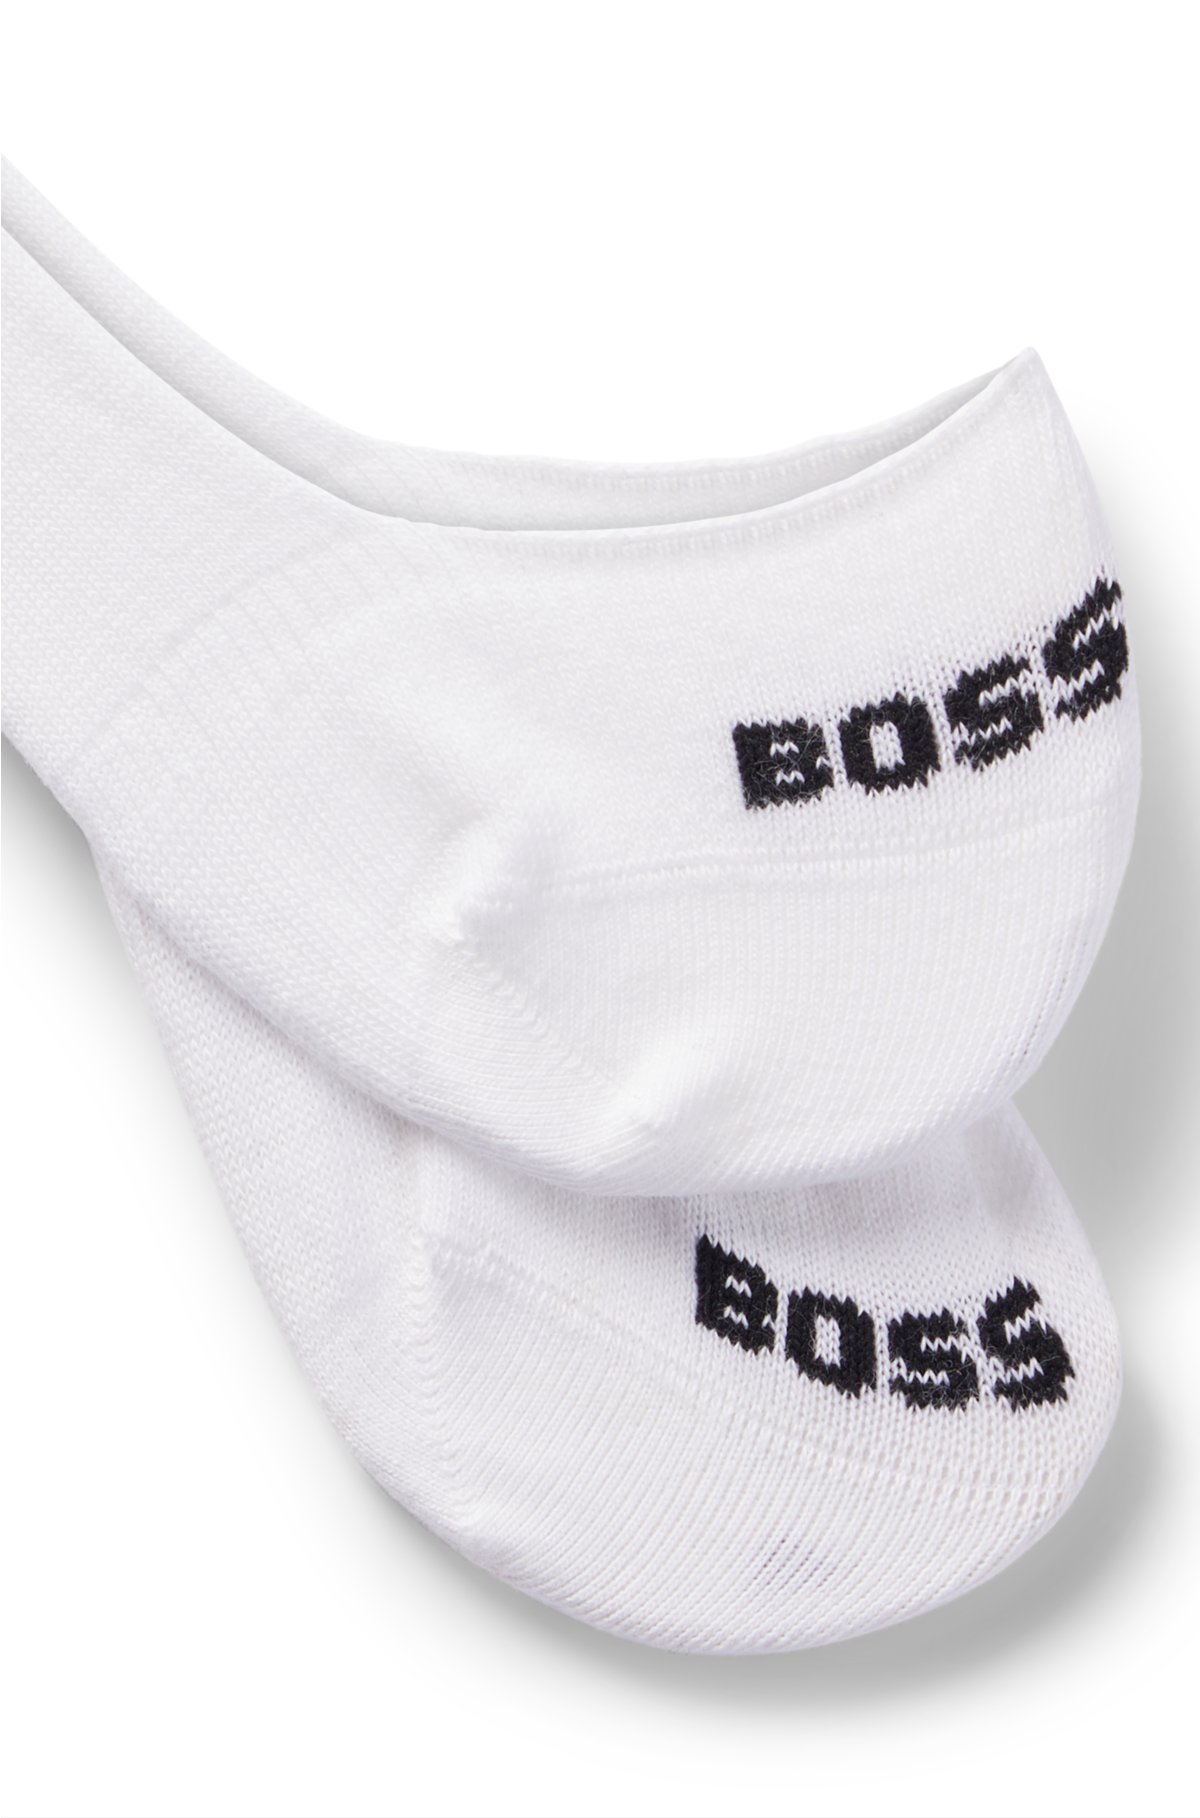 Two-pack of invisible socks with logo details, White